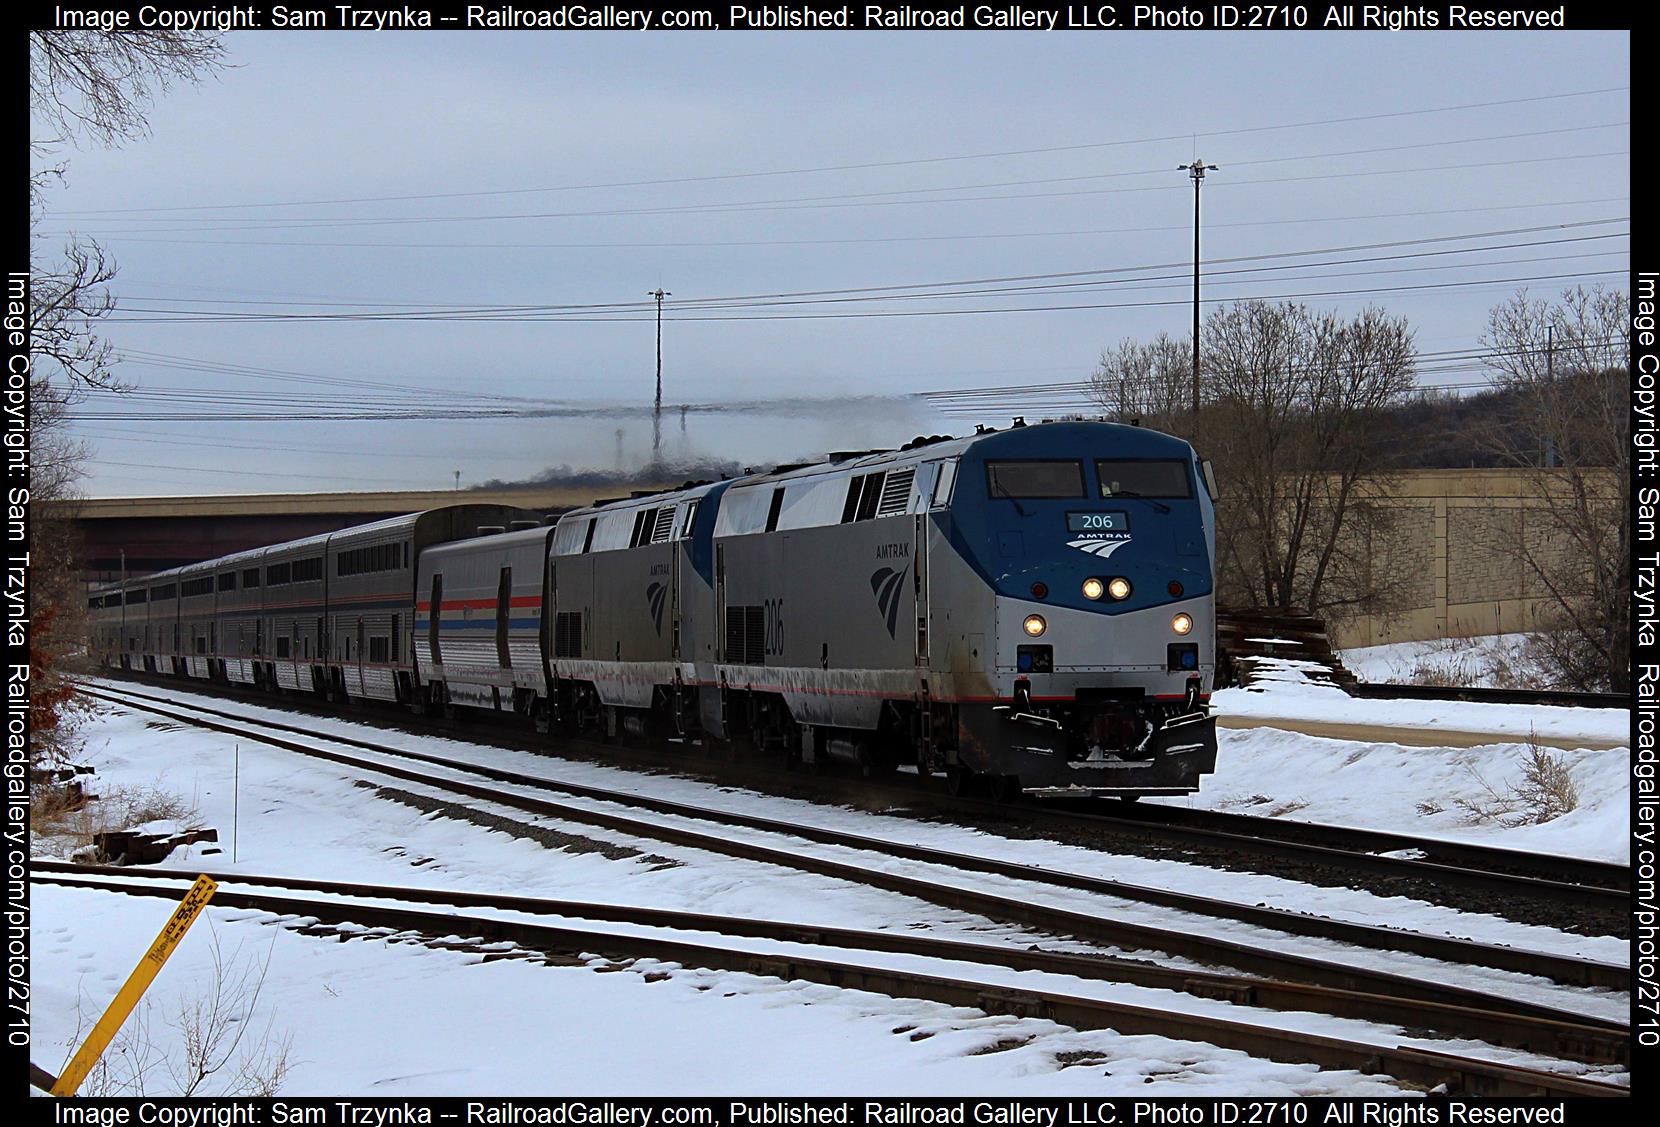 AMTK 206 is a class GE P42DC and  is pictured in Newport, Minnesota, USA.  This was taken along the BNSF St. Paul Subdivision on the Amtrak. Photo Copyright: Sam Trzynka uploaded to Railroad Gallery on 12/17/2023. This photograph of AMTK 206 was taken on Thursday, March 02, 2023. All Rights Reserved. 